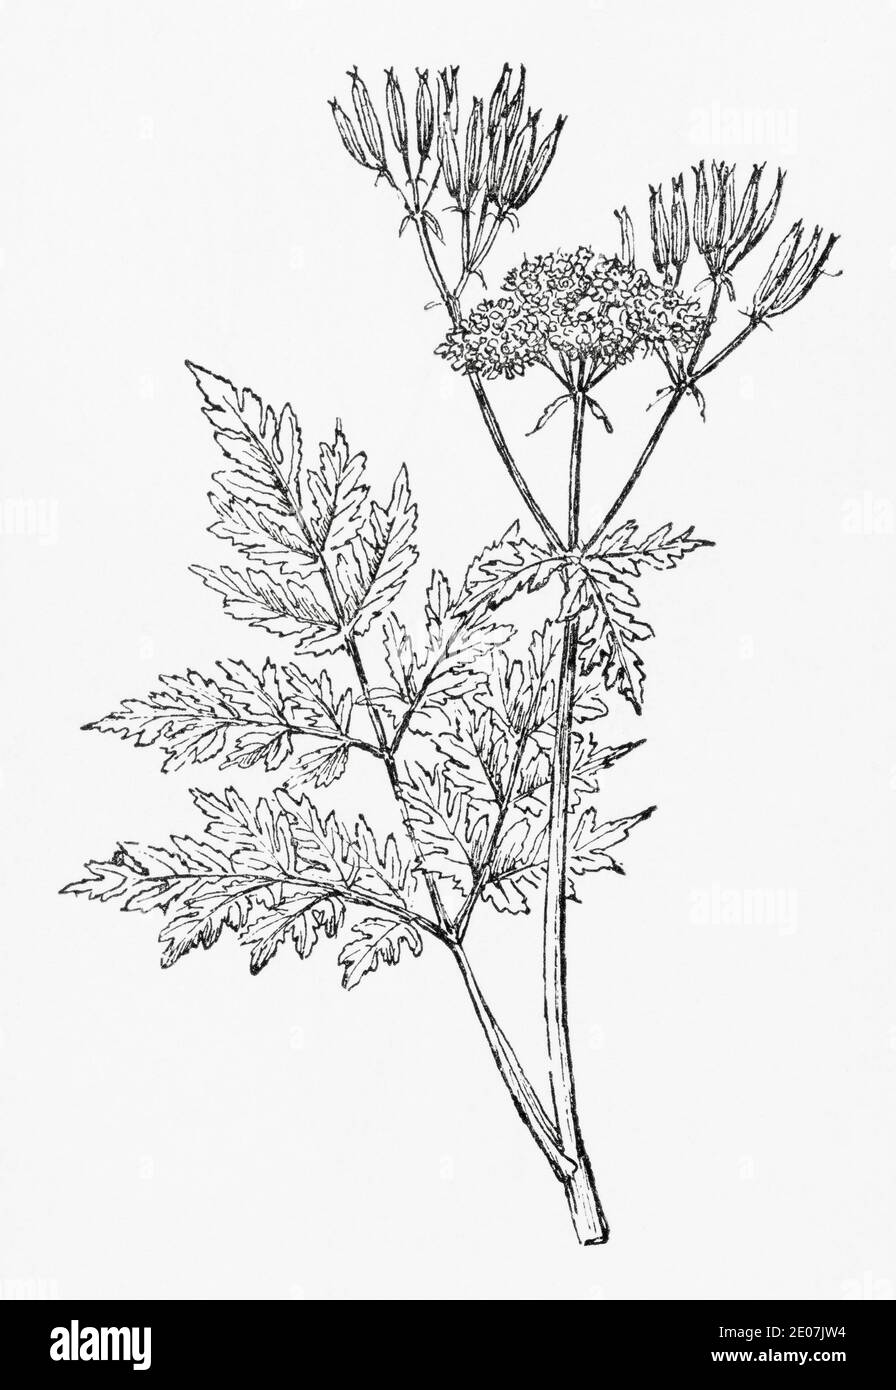 Old botanical illustration engraving of Sweet Cicely / Myrrhis odorata. Drawings of British umbellifers. Traditional medicinal herbal plant. See Notes Stock Photo